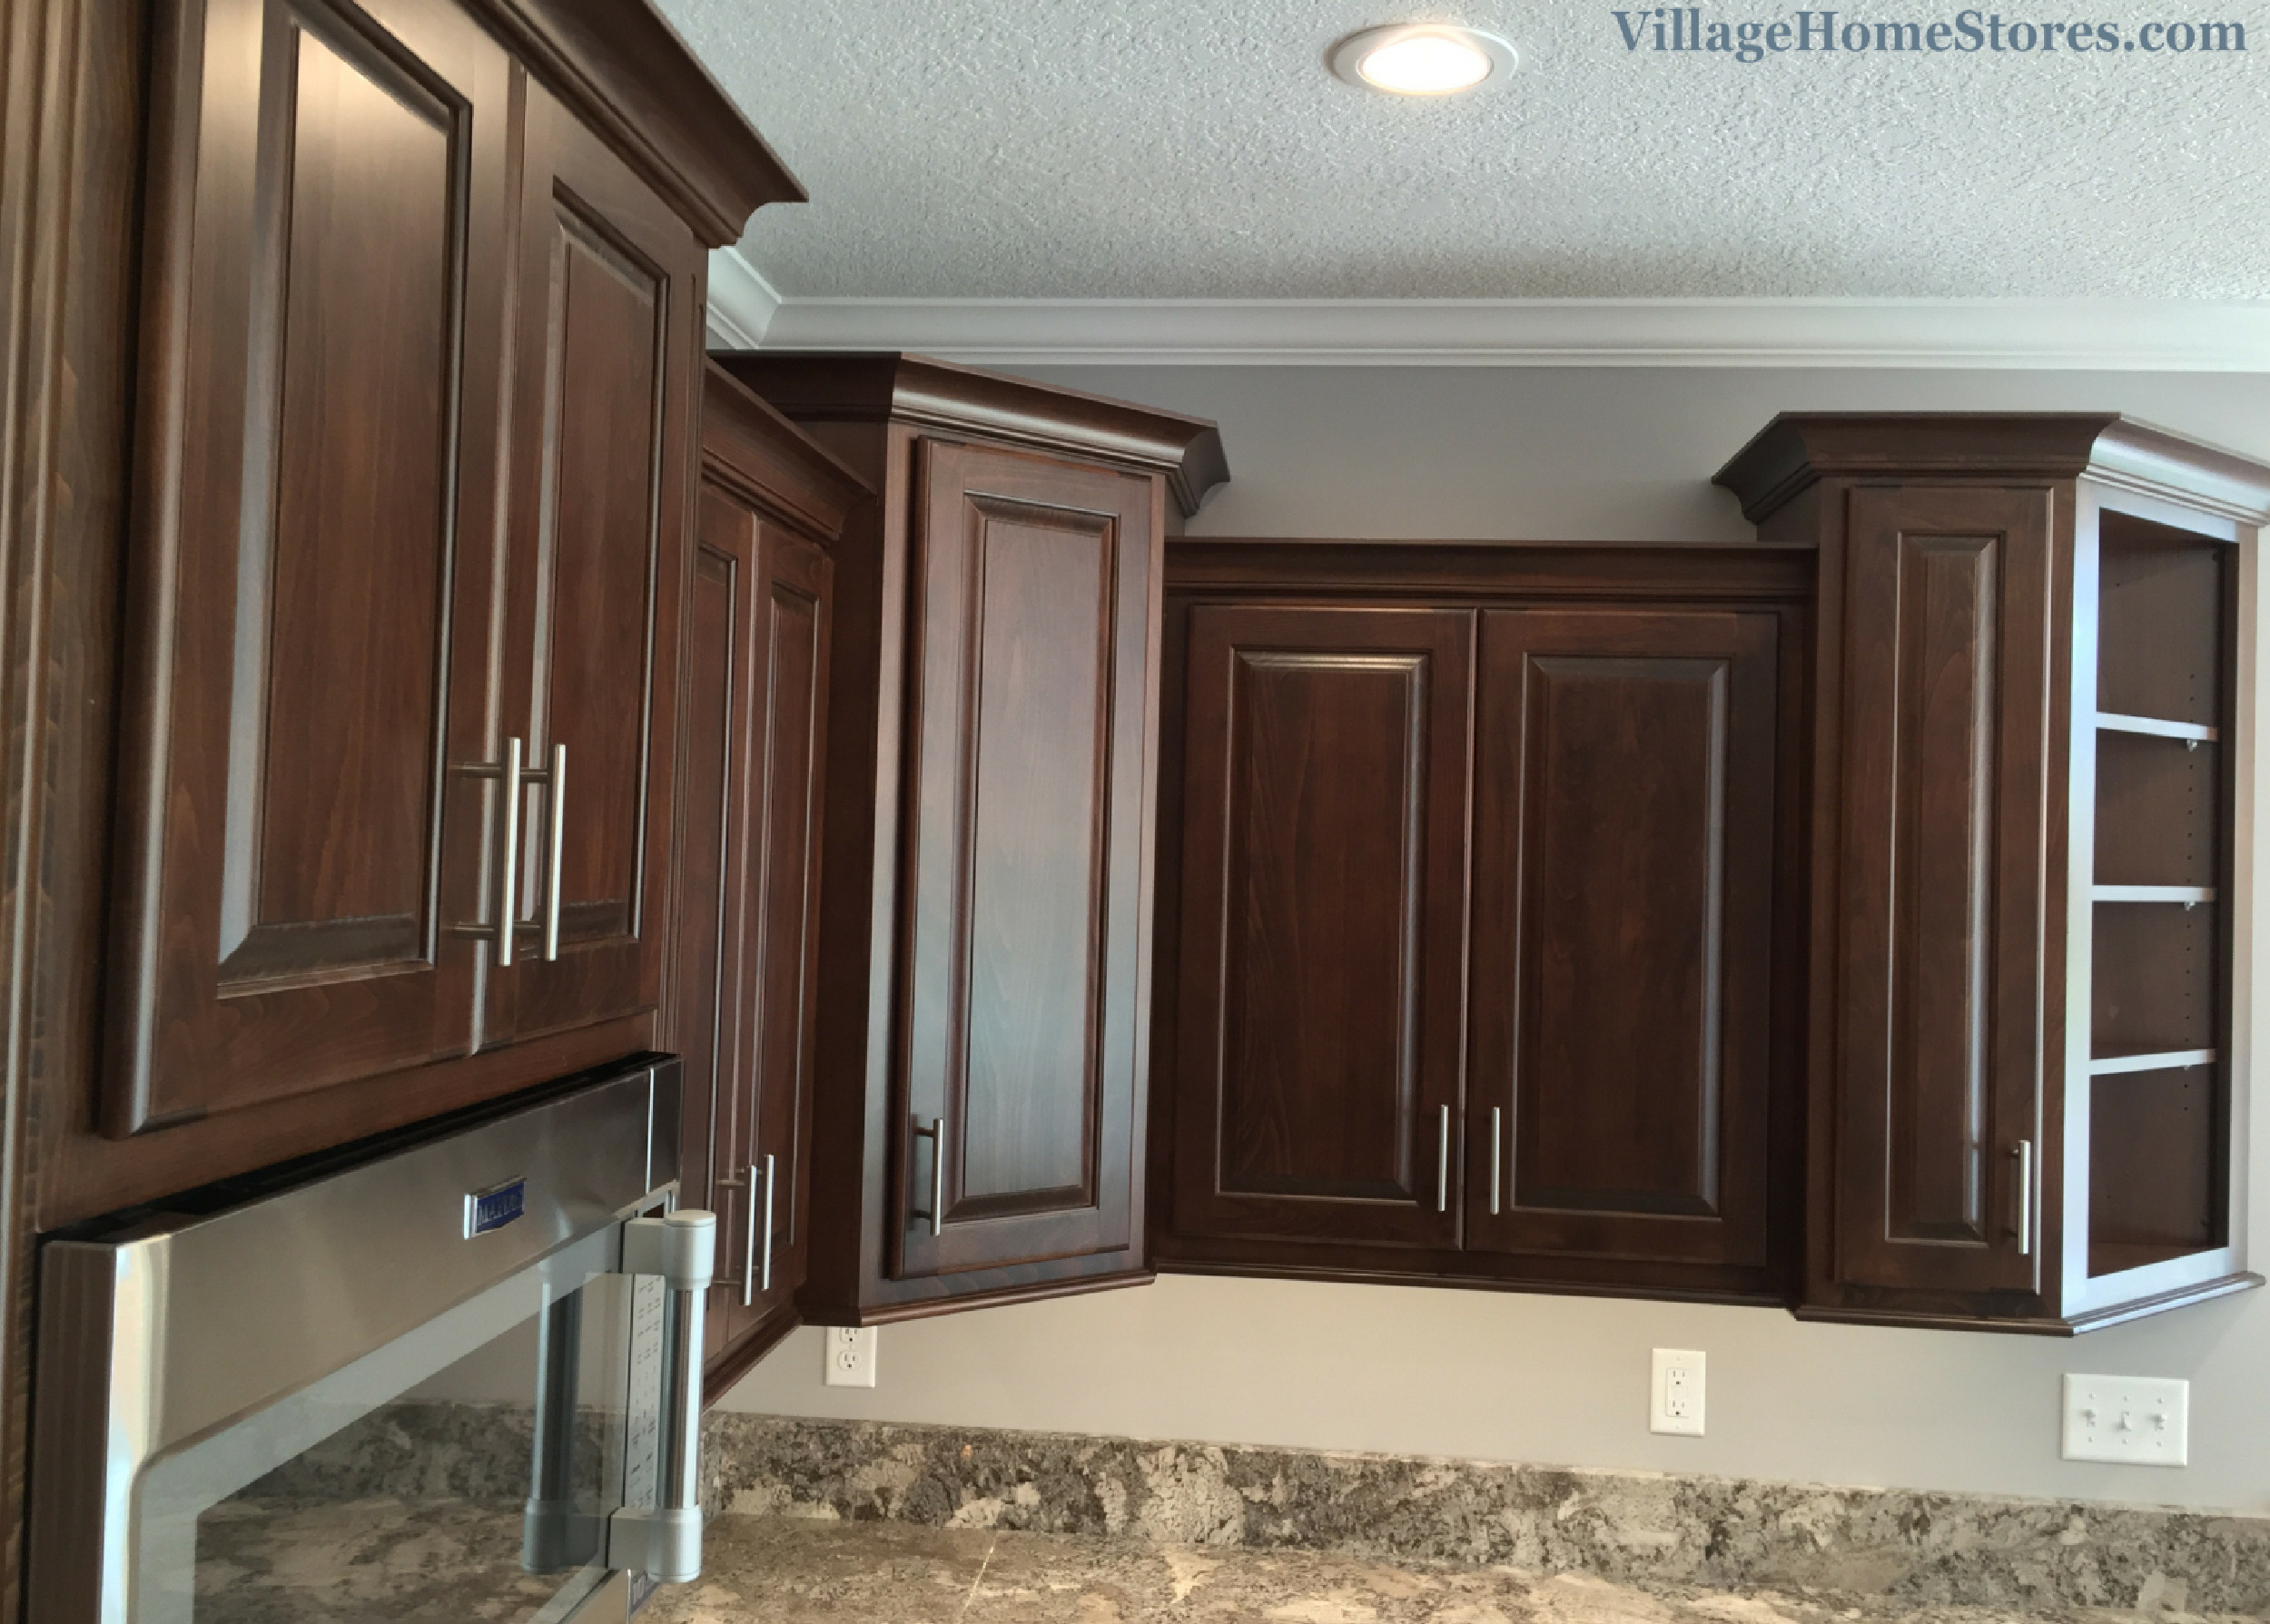 Kitchen Wall Cabinets Height
 Kitchen Reaching New Heights in Coal Valley IL Village